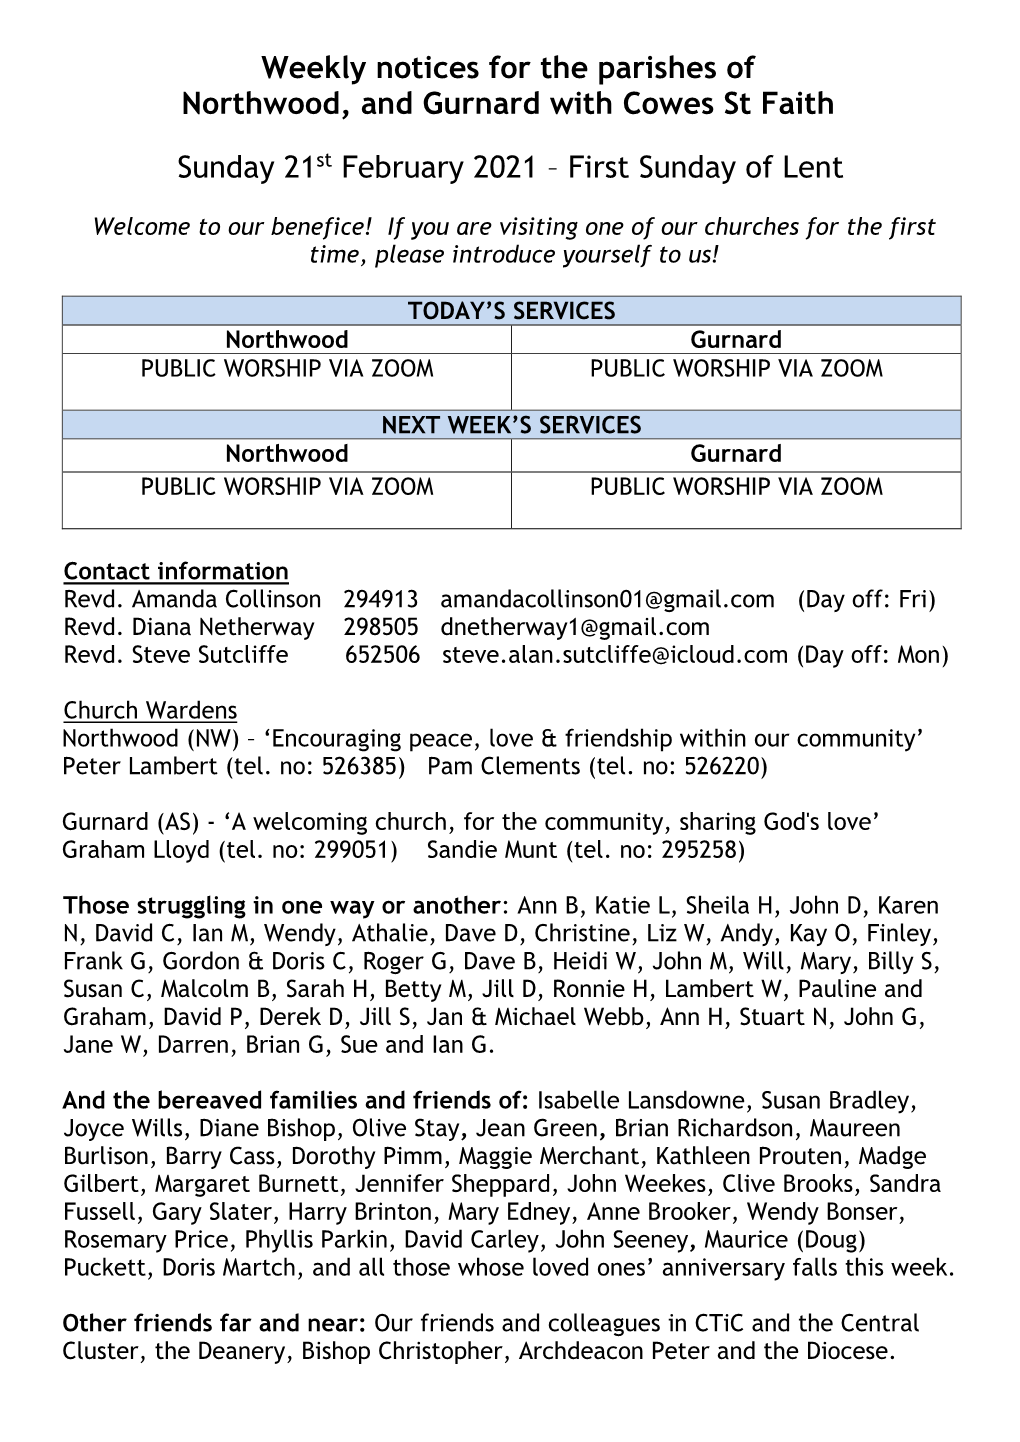 Weekly Notices for the Parishes of Northwood, Gurnard and Cowes St Faith's